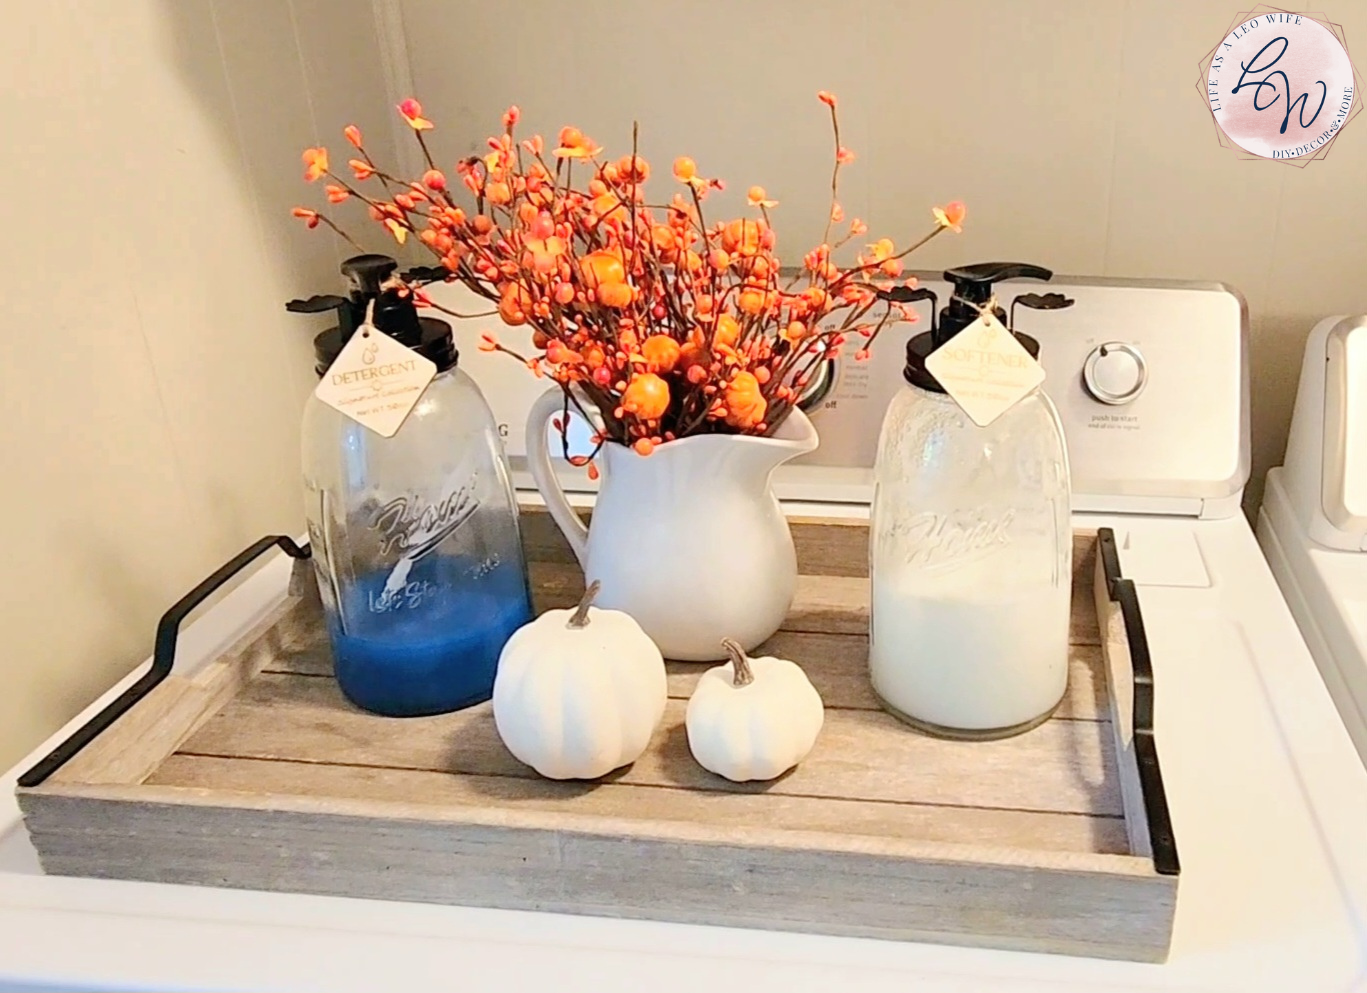 Laundry detergent and fabric softener in dispensers in decorative jars on a wood tray with pumpkin stems and white pumpkins in my fall laundry area during the home tour.